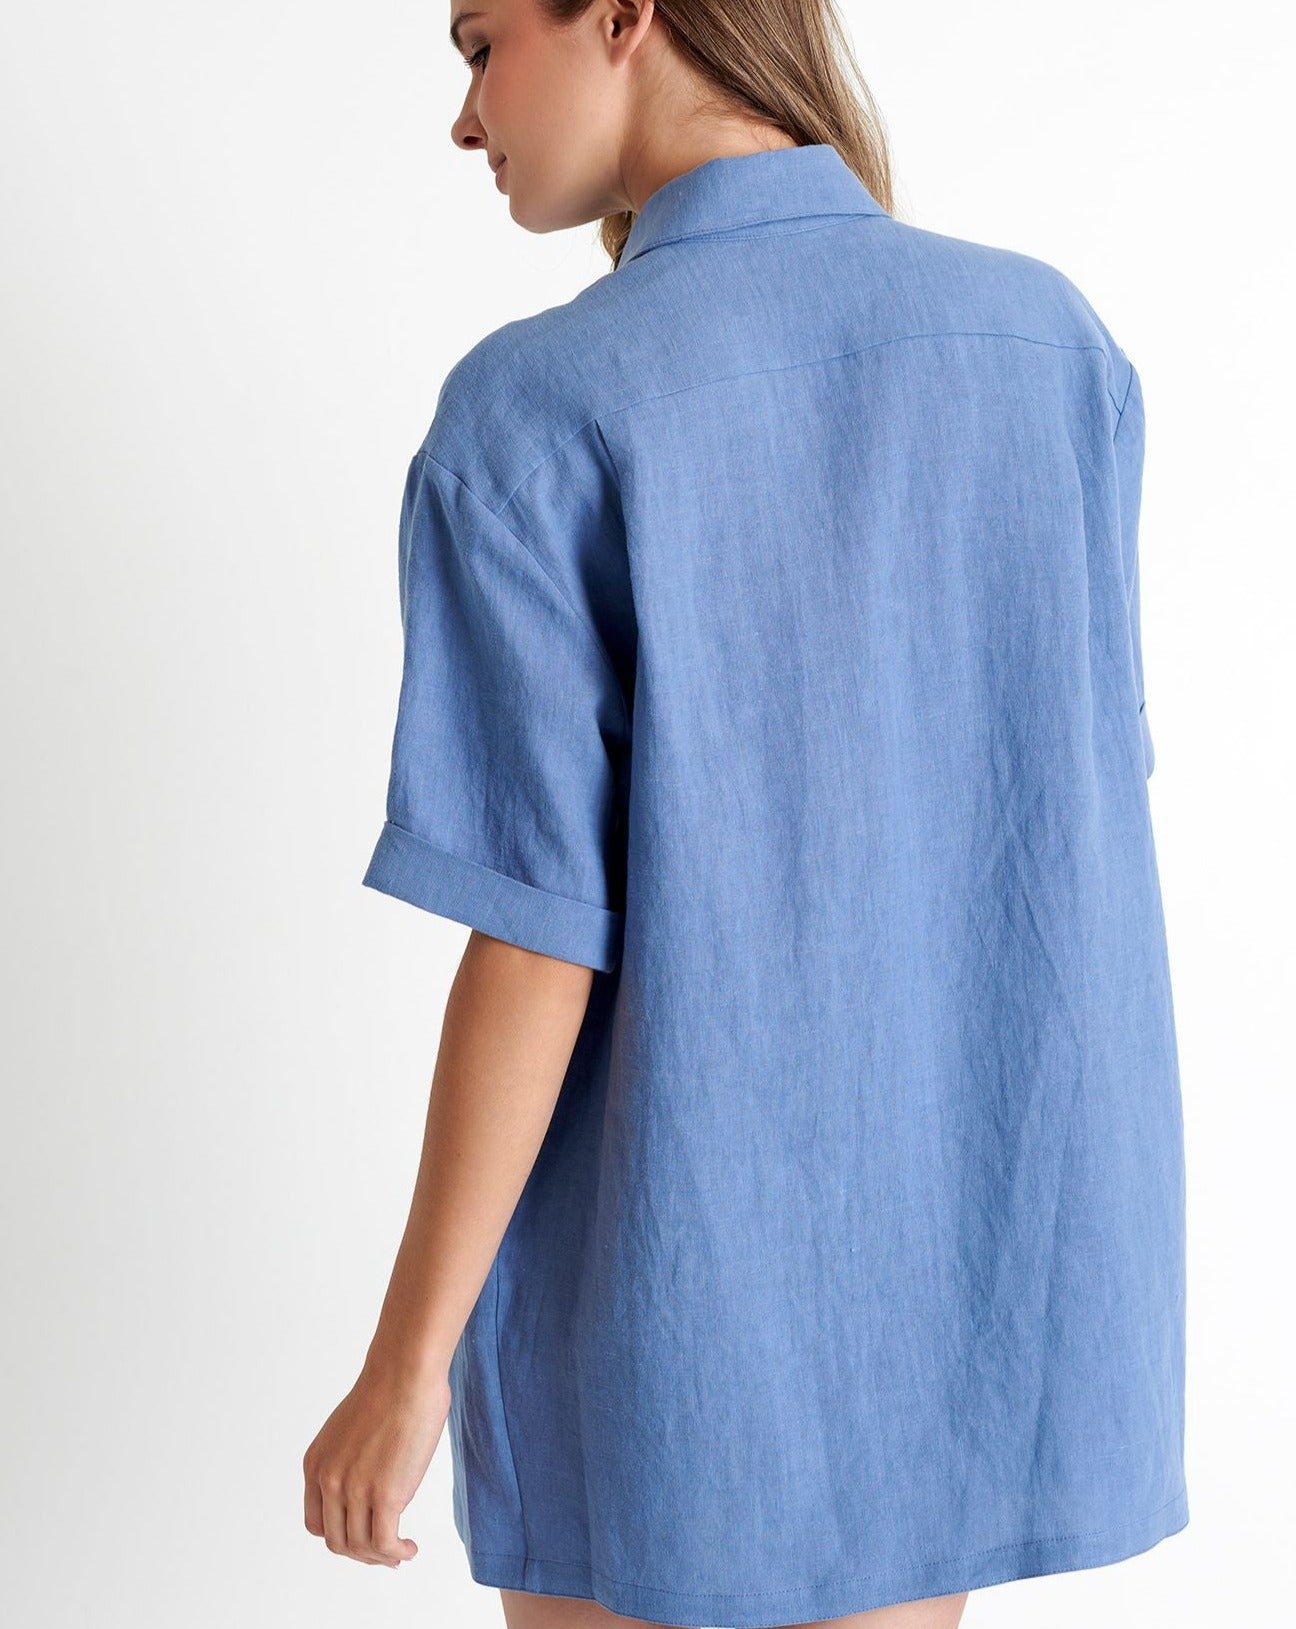 Zola Linen Cover-Up